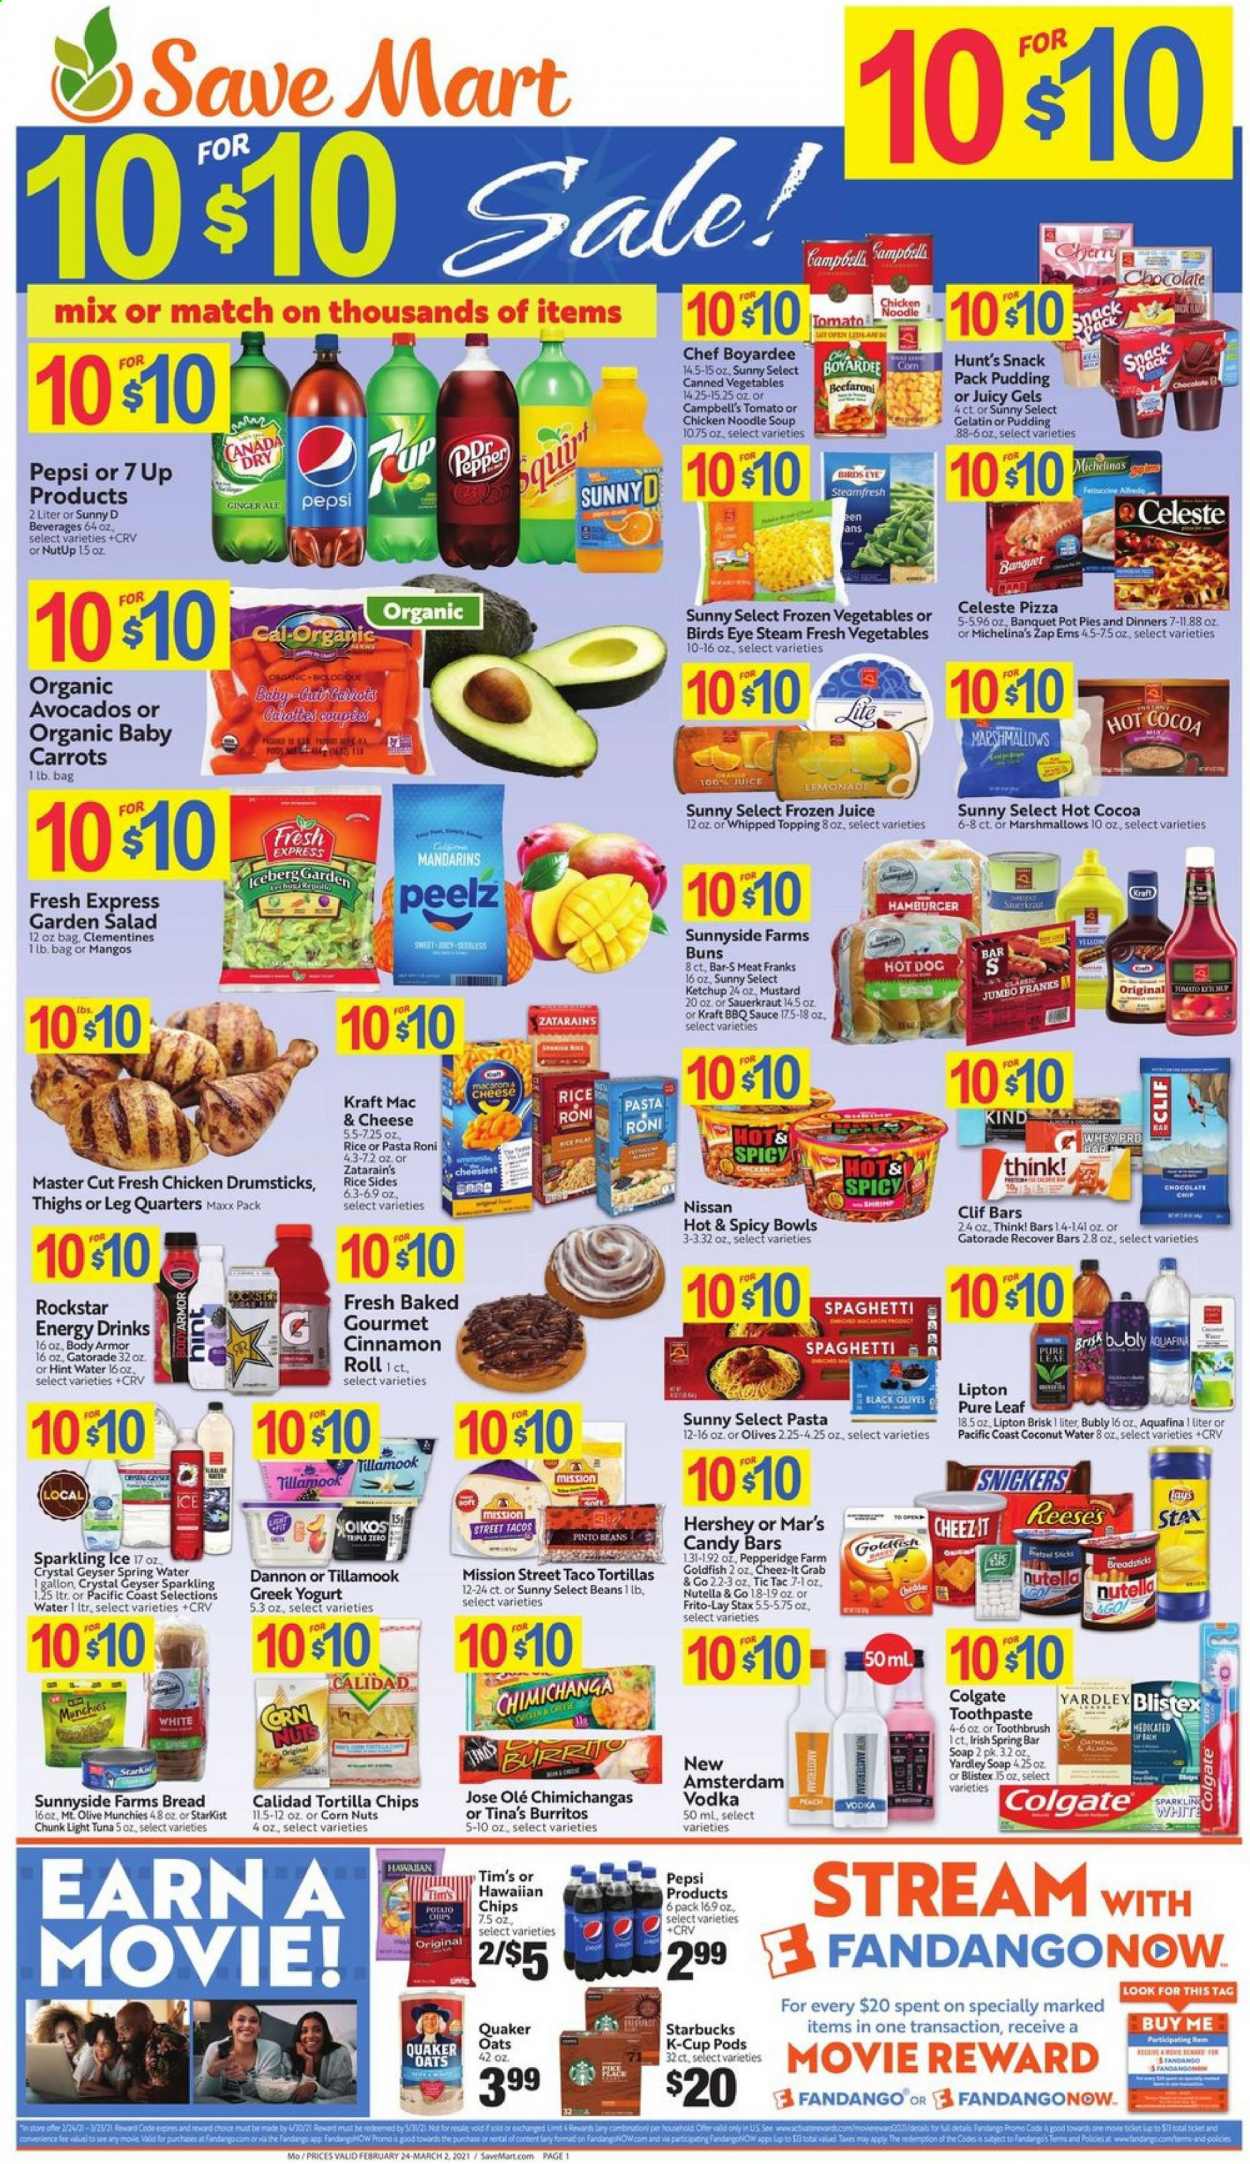 thumbnail - Save Mart Flyer - 02/24/2021 - 03/02/2021 - Sales products - bread, bread sticks, tacos, cinnamon roll, pot pie, buns, chicken drumsticks, tuna, StarKist, Campbell's, macaroni & cheese, hot dog, pizza, soup, salad, sauce, Bird's Eye, Quaker, Kraft®, cheddar, greek yoghurt, pudding, yoghurt, Dannon, Reese's, beans, carrots, corn, frozen vegetables, mango, marshmallows, Nutella, Snickers, Tic Tac, tortilla chips, Lay’s, Goldfish, Frito-Lay, Cheez-It, oatmeal, oats, topping, mandarines, sauerkraut, olives, canned vegetables, light tuna, Chef Boyardee, spaghetti, pinto beans, pasta, noodles, BBQ sauce, mustard, ketchup, almonds, Canada Dry, ginger ale, lemonade, Pepsi, juice, energy drink, Lipton, coconut water, 7UP, Rockstar, Gatorade, Aquafina, spring water, hot cocoa, Pure Leaf, Starbucks, coffee capsules, K-Cups, Celeste, vodka, soap bar, soap, gelatin, avocado, clementines. Page 1.